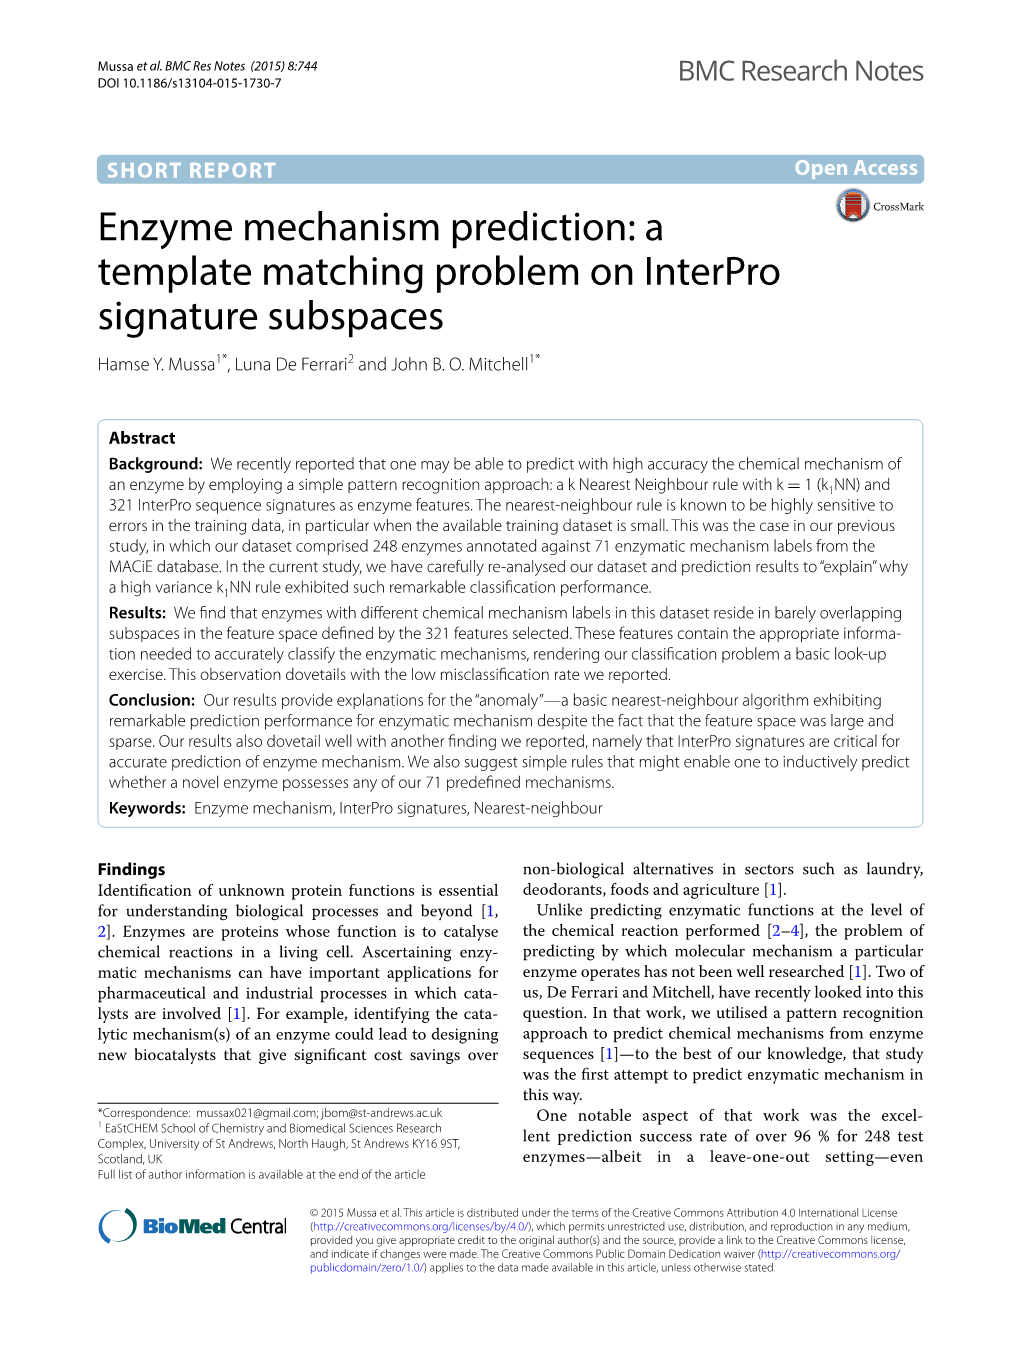 Enzyme Mechanism Prediction: a Template Matching Problem on Interpro Signature Subspaces Hamse Y